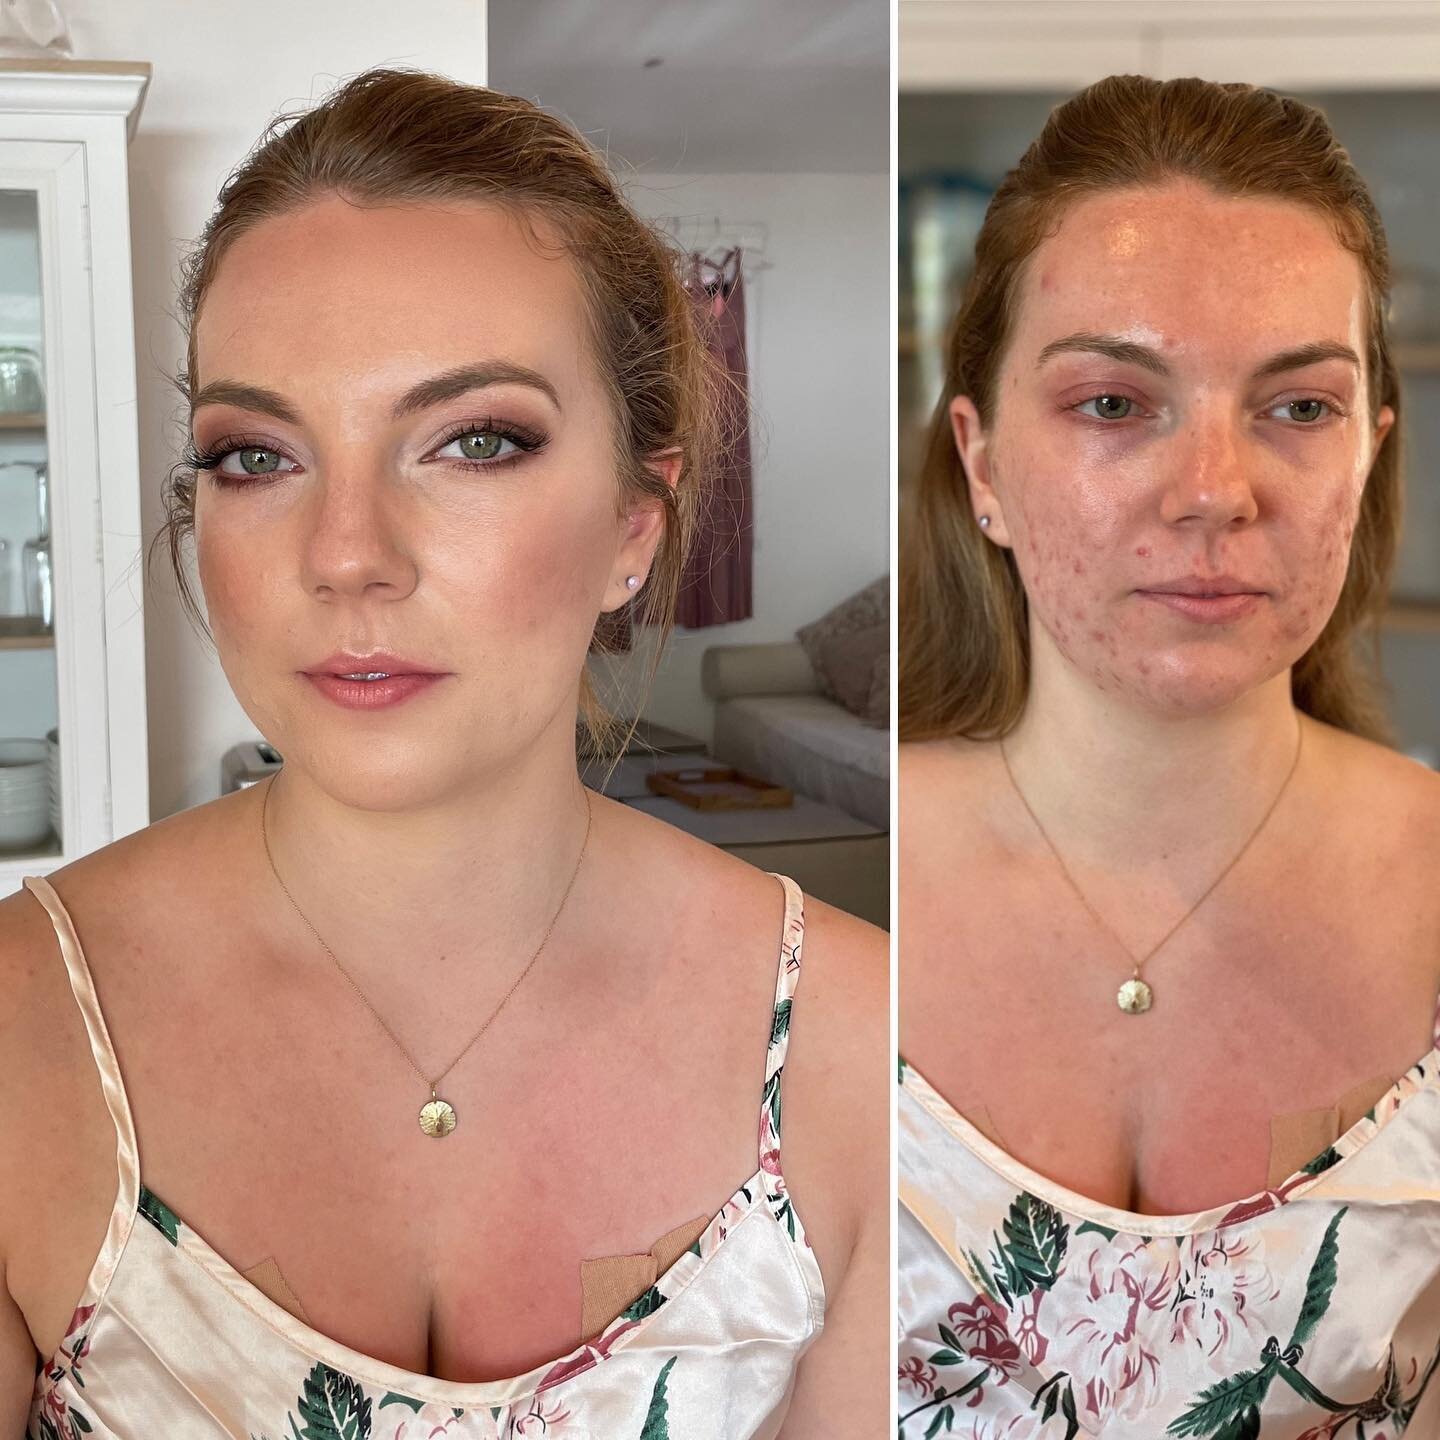 Before &amp; After ✨
Beautiful inside and out &amp; the sweetest sister of the bride, we got to create this natural glam look for this very special day. 💕 
.
.
.
#styledbycarolinatorstensson #mallorcawedding #mallorcaproposal #mallorcaweddings #make